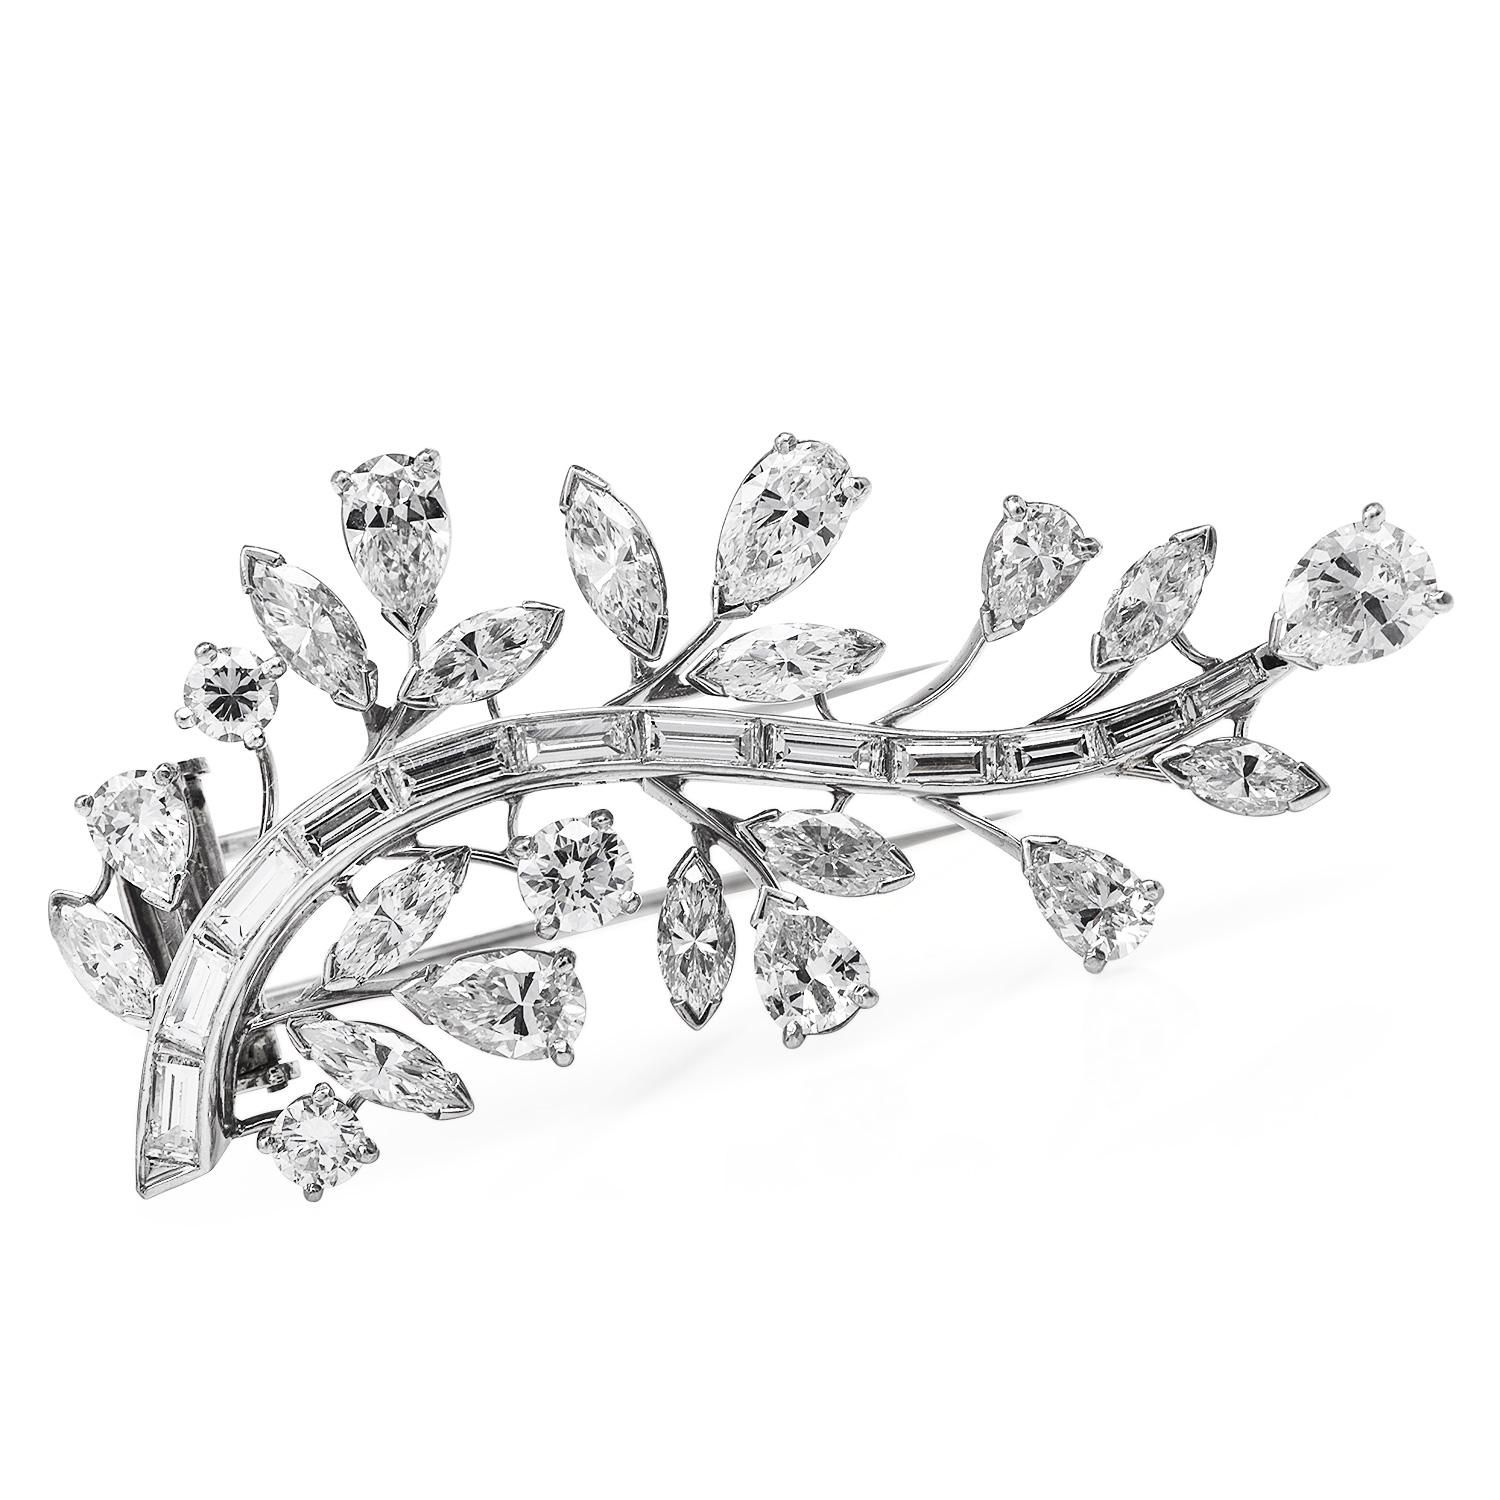 Dazzle yourself with this Vintage Cartier Diamond Platinum Botanical Pin Brooch

Exquisitely crafted in solid platinum, the botanical pattern, Signed Cartier.

This stunning vintage pin is Covered with:

(3) round-cut, prong-set, (3) marquise-cut,